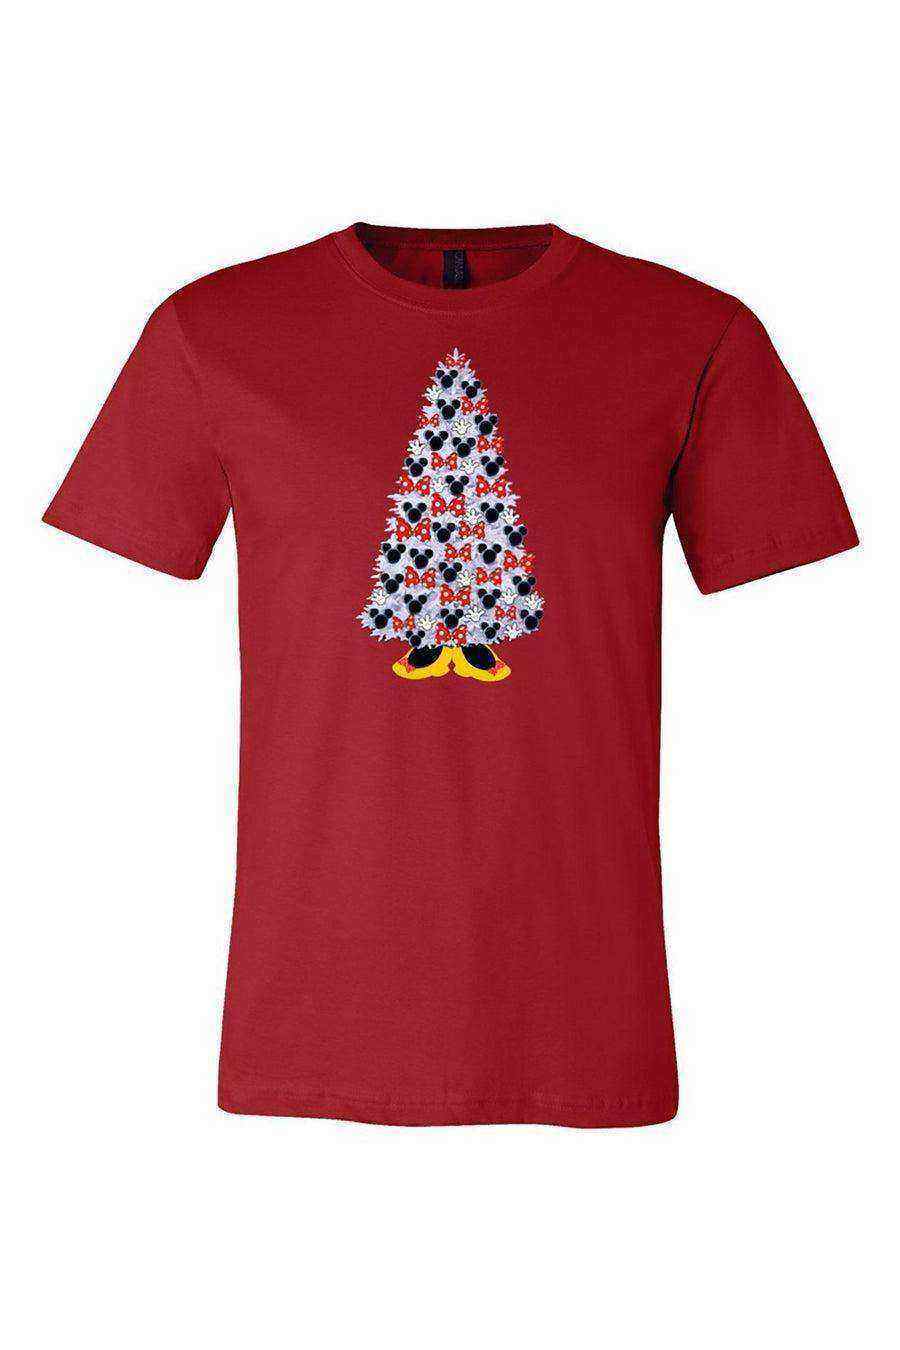 Youth | Minnie Christmas Tree Shirt - Dylan's Tees